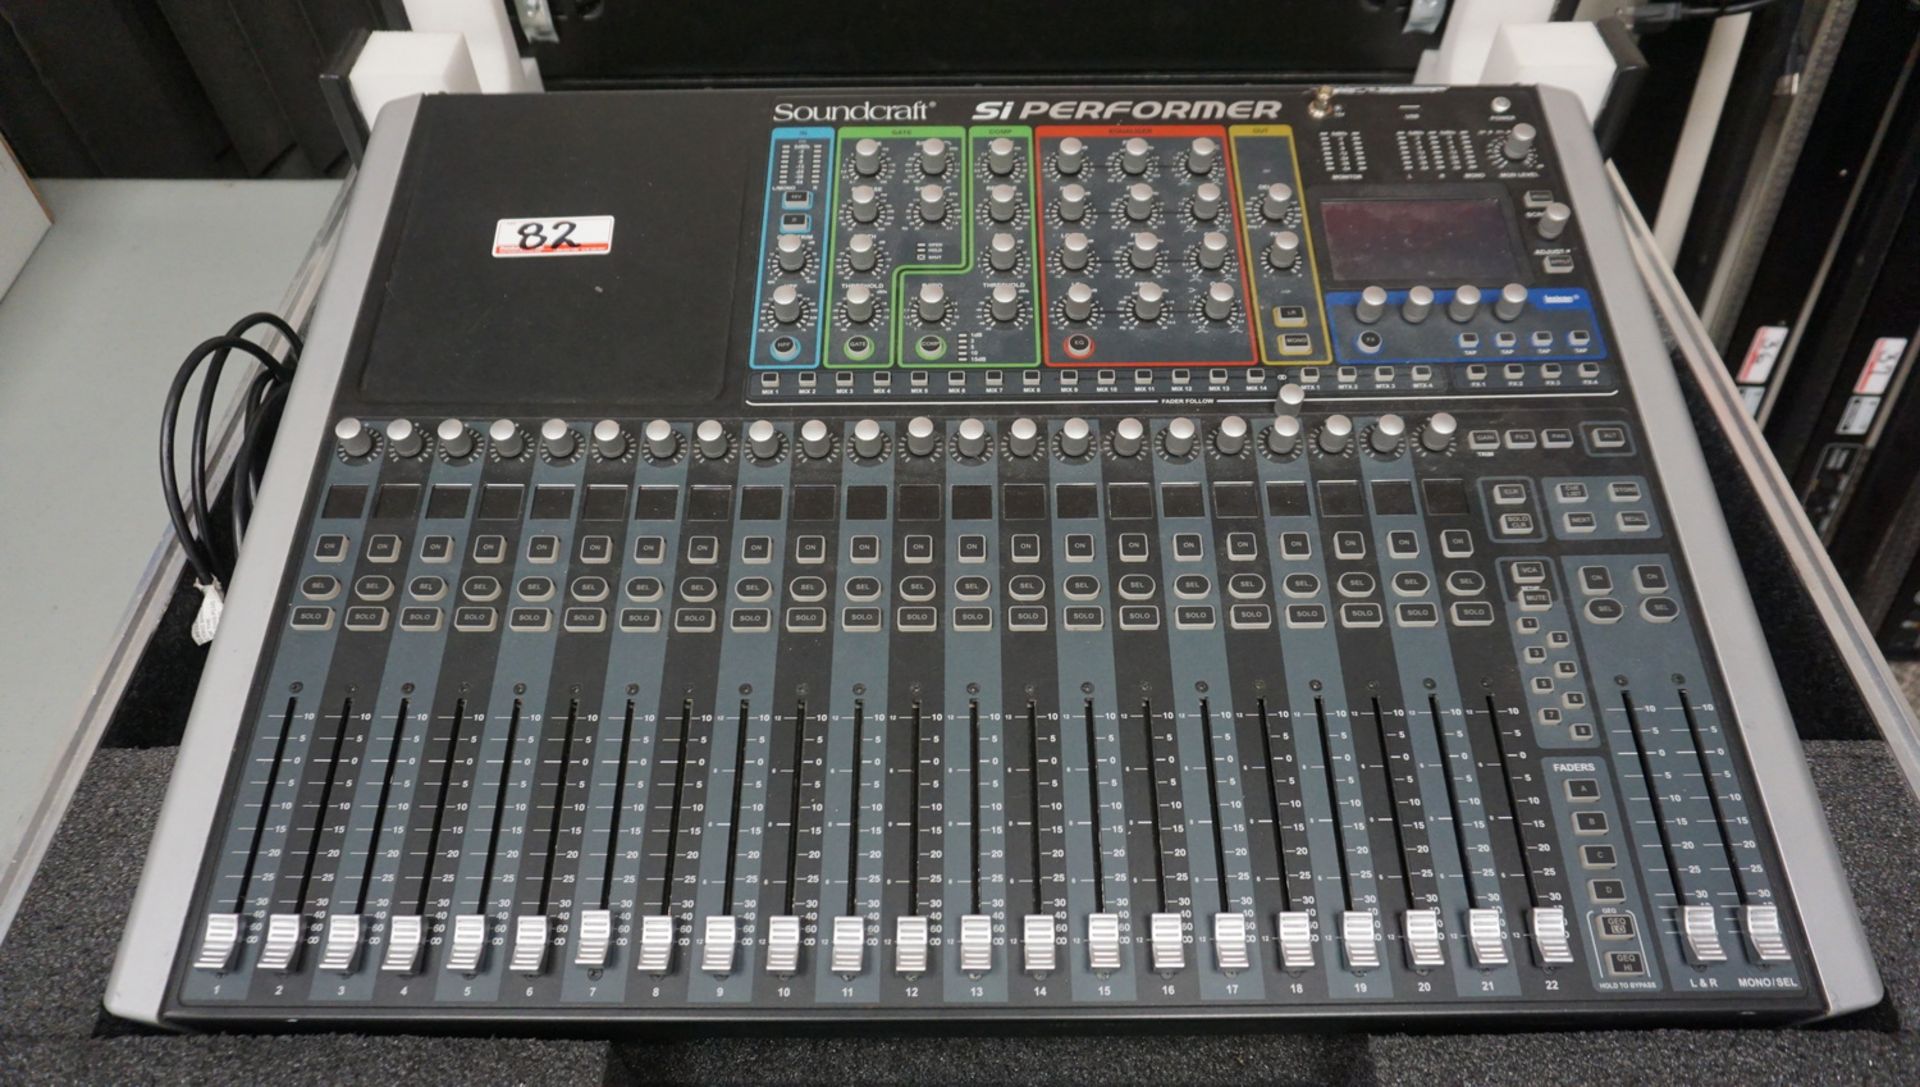 SOUNDCRAFT SI PERFORMER 2 DIGITAL LIVE SOUND MIXER W/ BUILT-IN LIGHTING CONTROLLER, S/N 30329374 C/W - Image 2 of 5